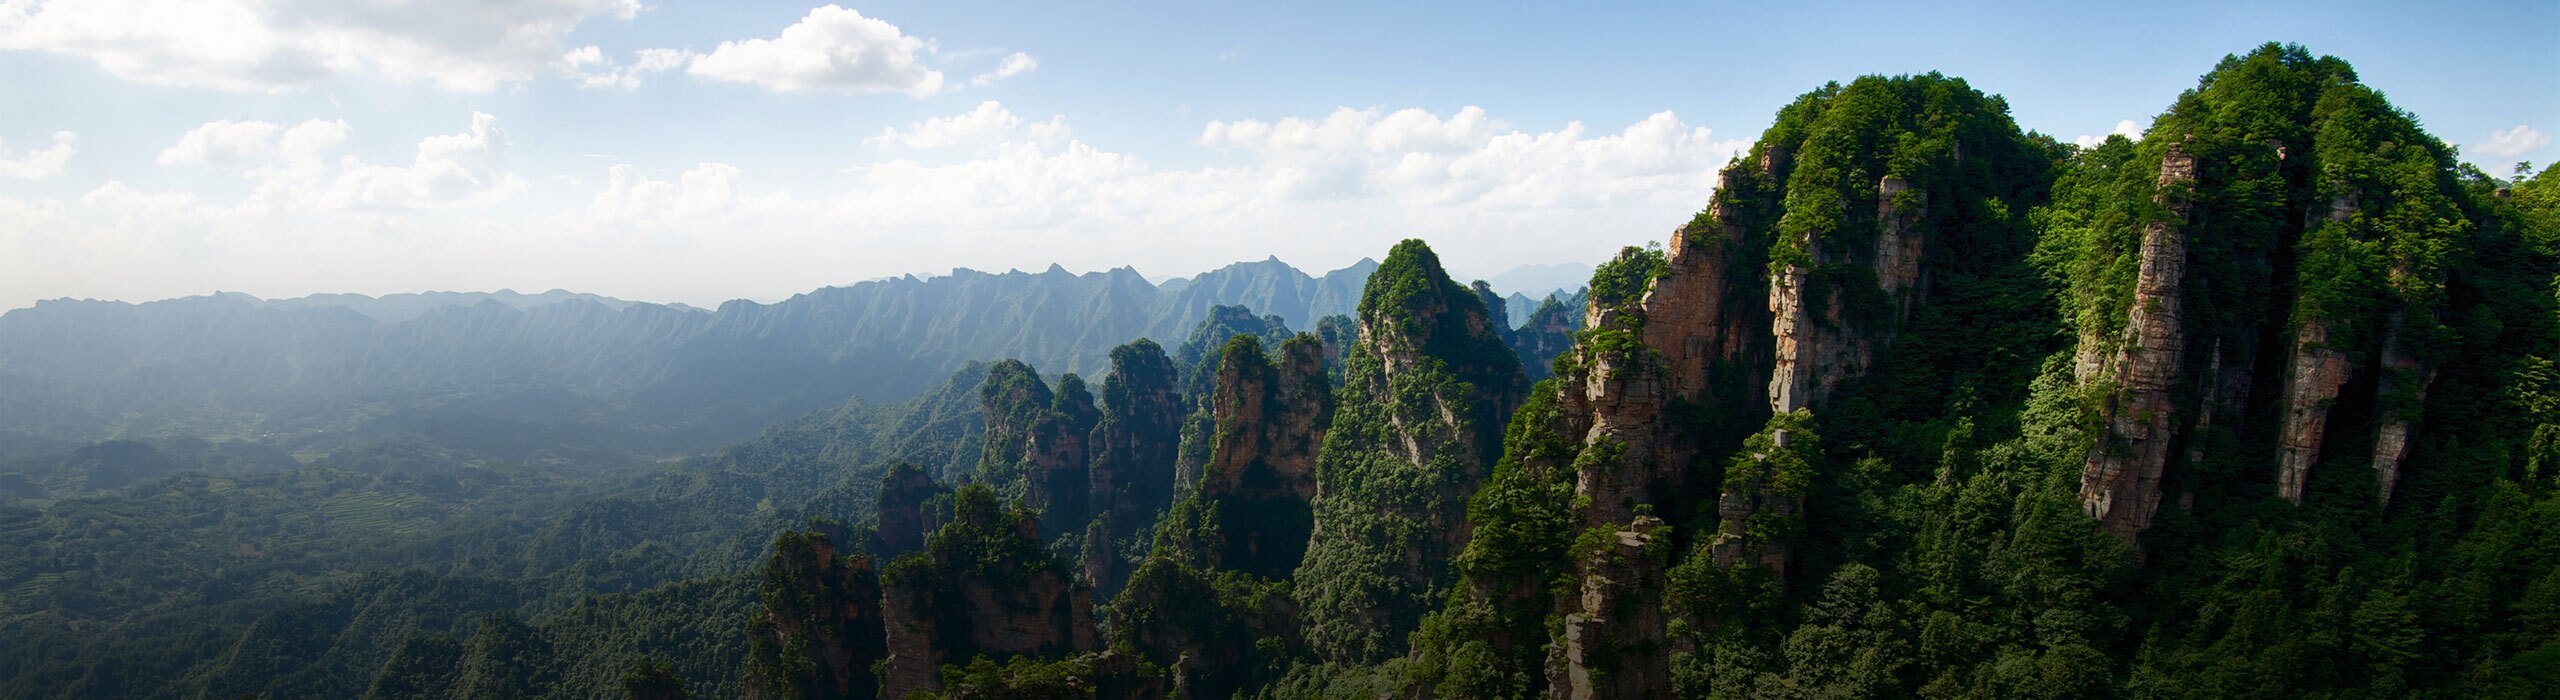 14-Day China Natural Wonders Discovery